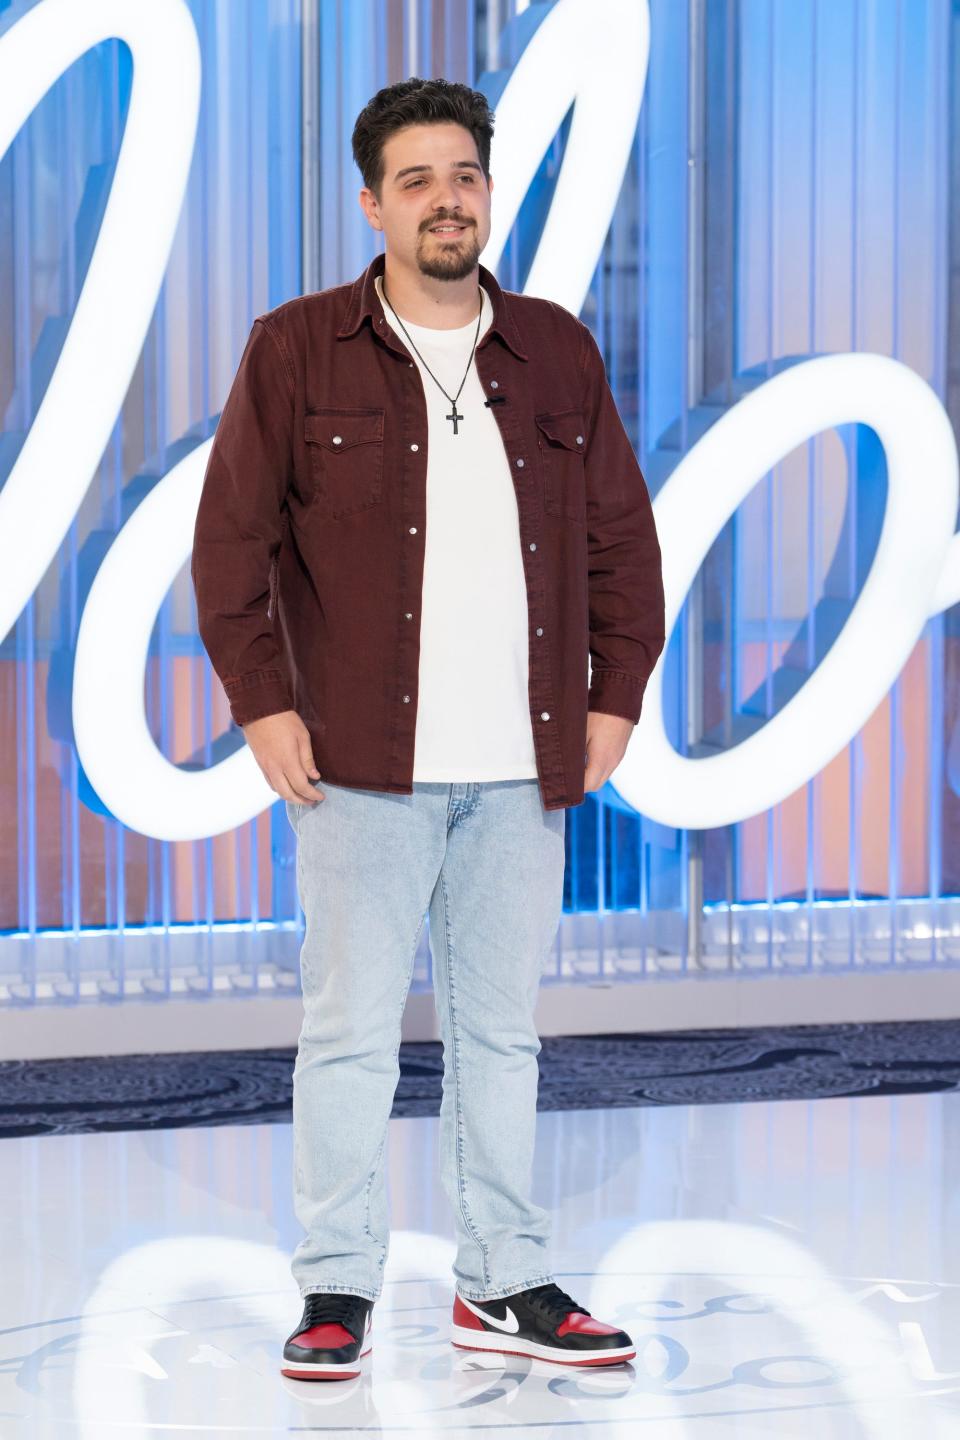 Barber Noah Peters auditions with "I Won't Let Go" by Rascal Flatts on Season 7, Episode 2, of "American Idol," airing Feb. 25, 2024.